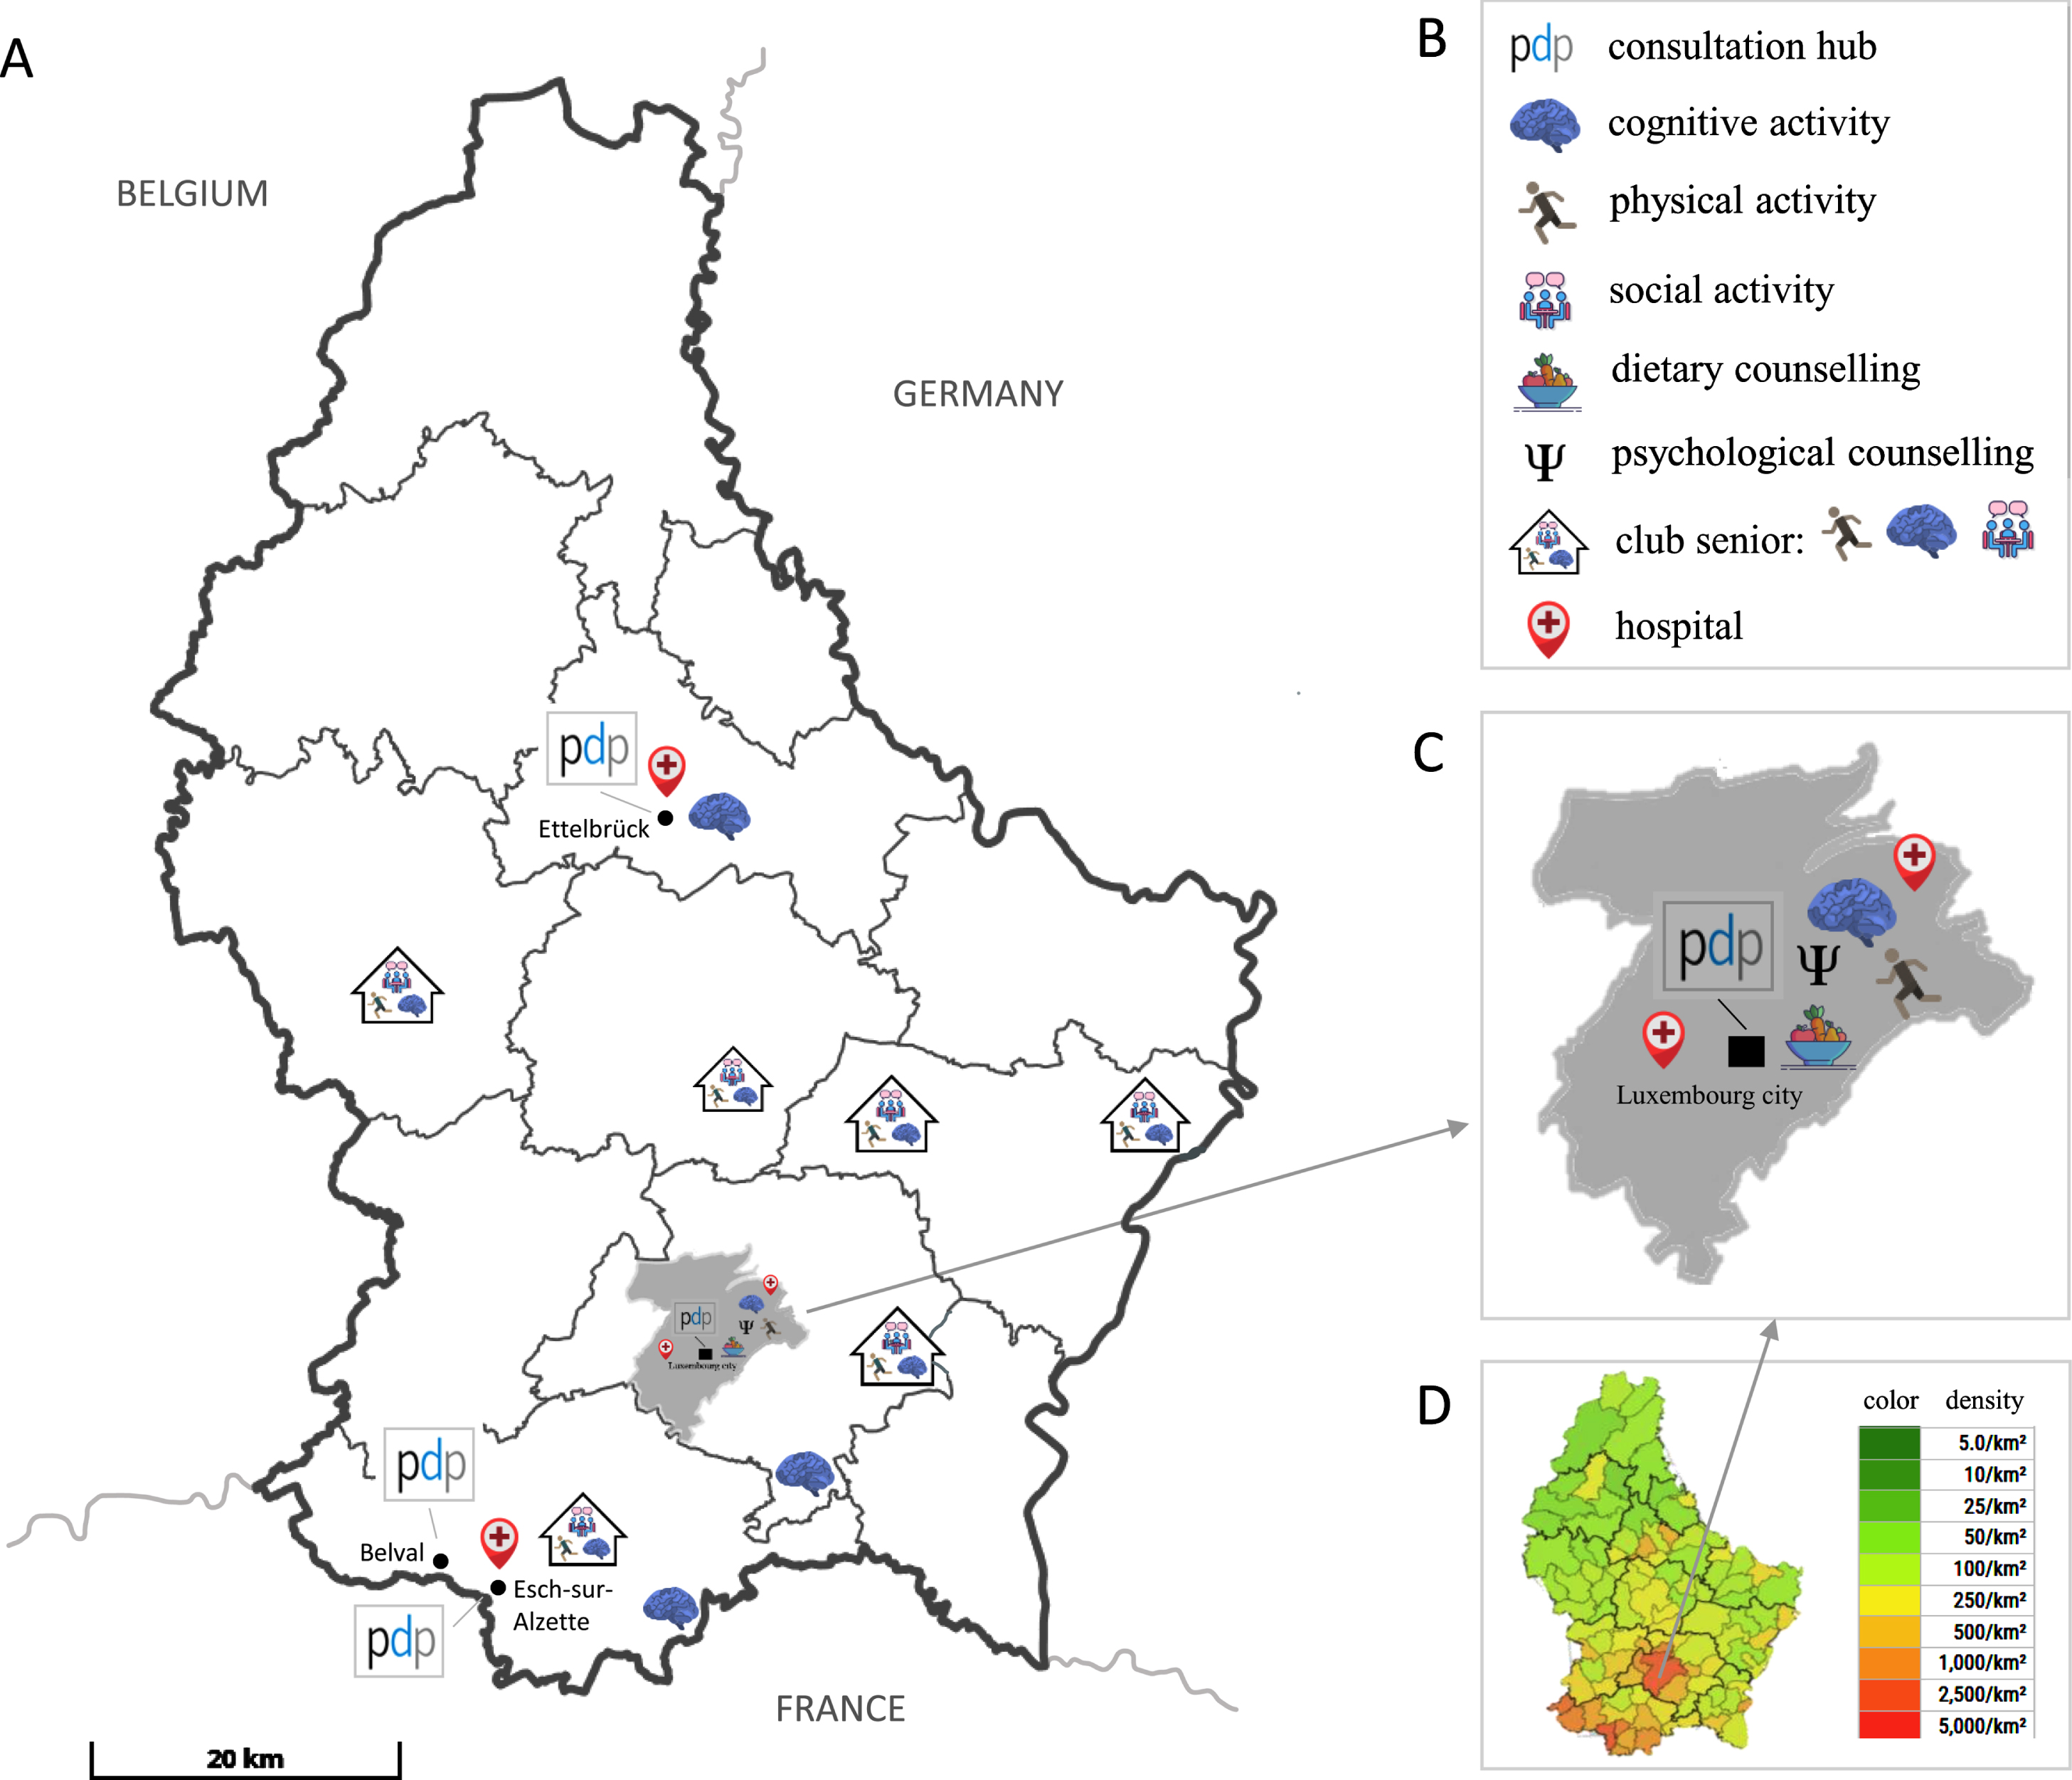 Geographical locations of pdp-recruitment hubs and voucher activities in Luxembourg. A) Map presenting locations of pdp-recruitment hubs and voucher activities. B) Map legend. C) Enlargement of activities/hubs within Luxembourg City. D) Population density map of Luxembourg. From Map of cantons of Luxembourg [political map], by Sémhur [wikigraphist], 2009, Wikimedia Commons [58]; Brinkhoff, T. (2022). City Population. (http://www.citypopulation.de). CC BY 3.0. [59]; Icons by Icons8 (https://icons8.com/) [60].